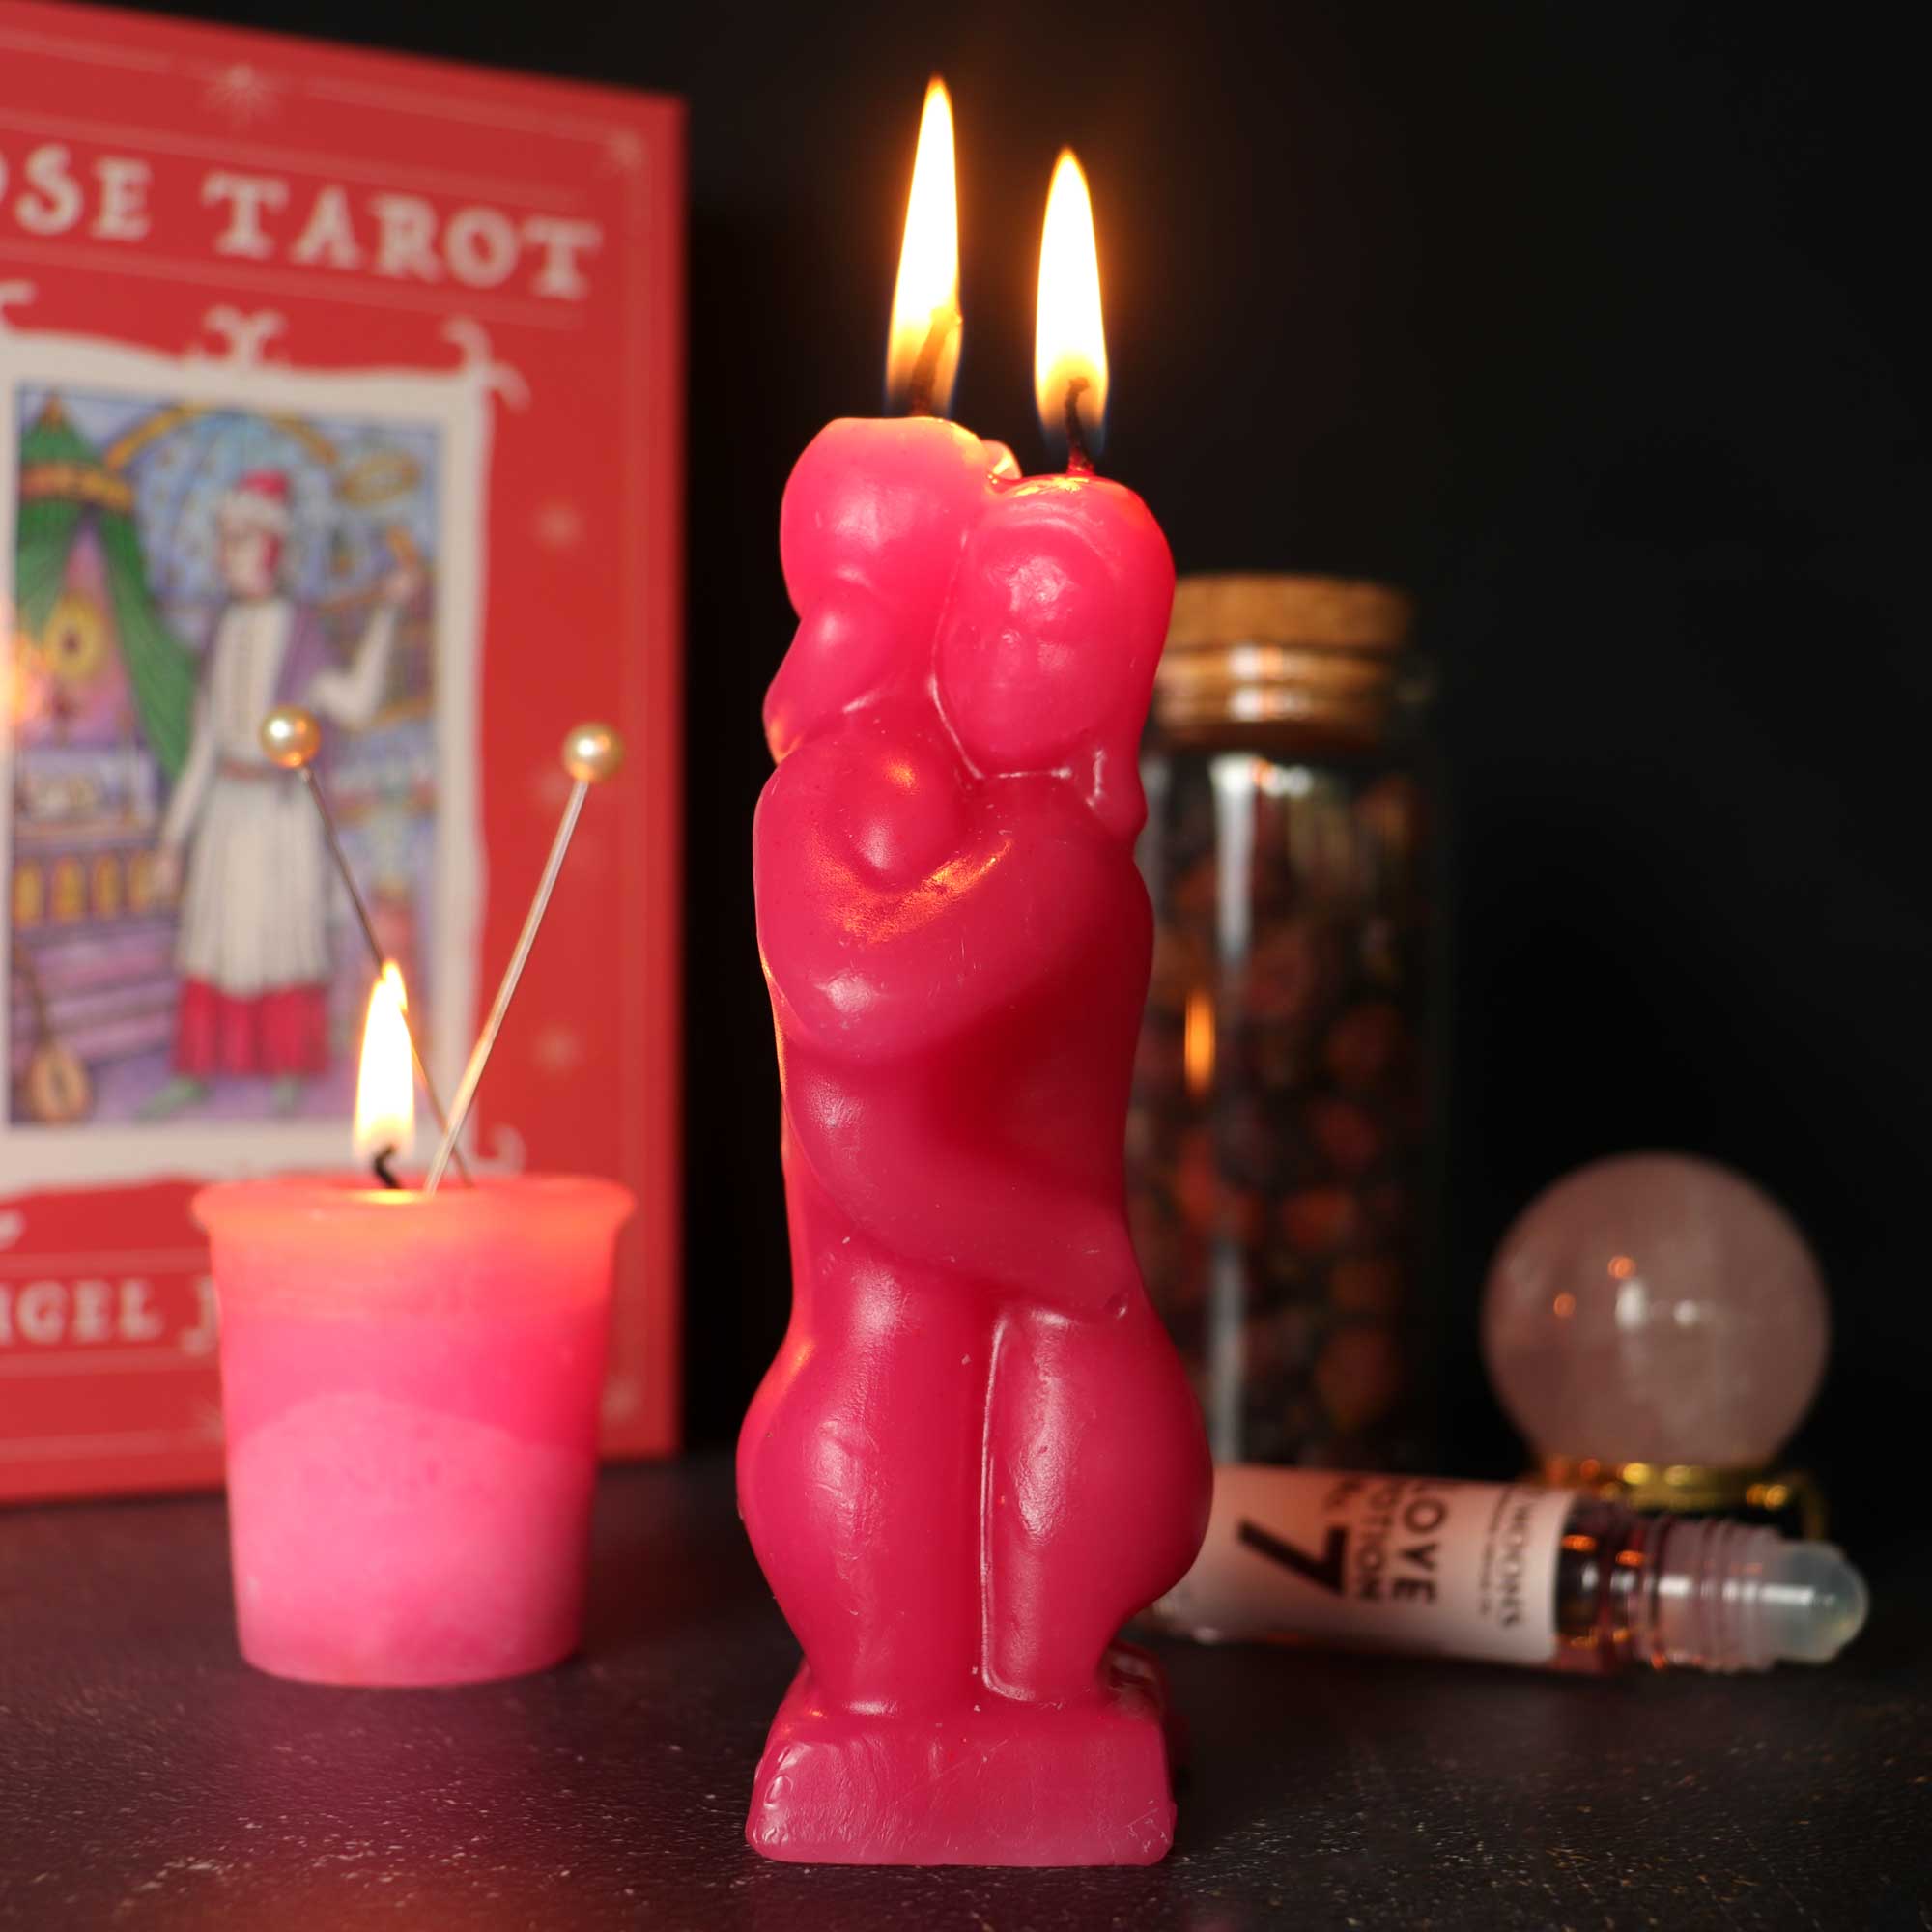 Erotic Couple Candle - 13 Moons